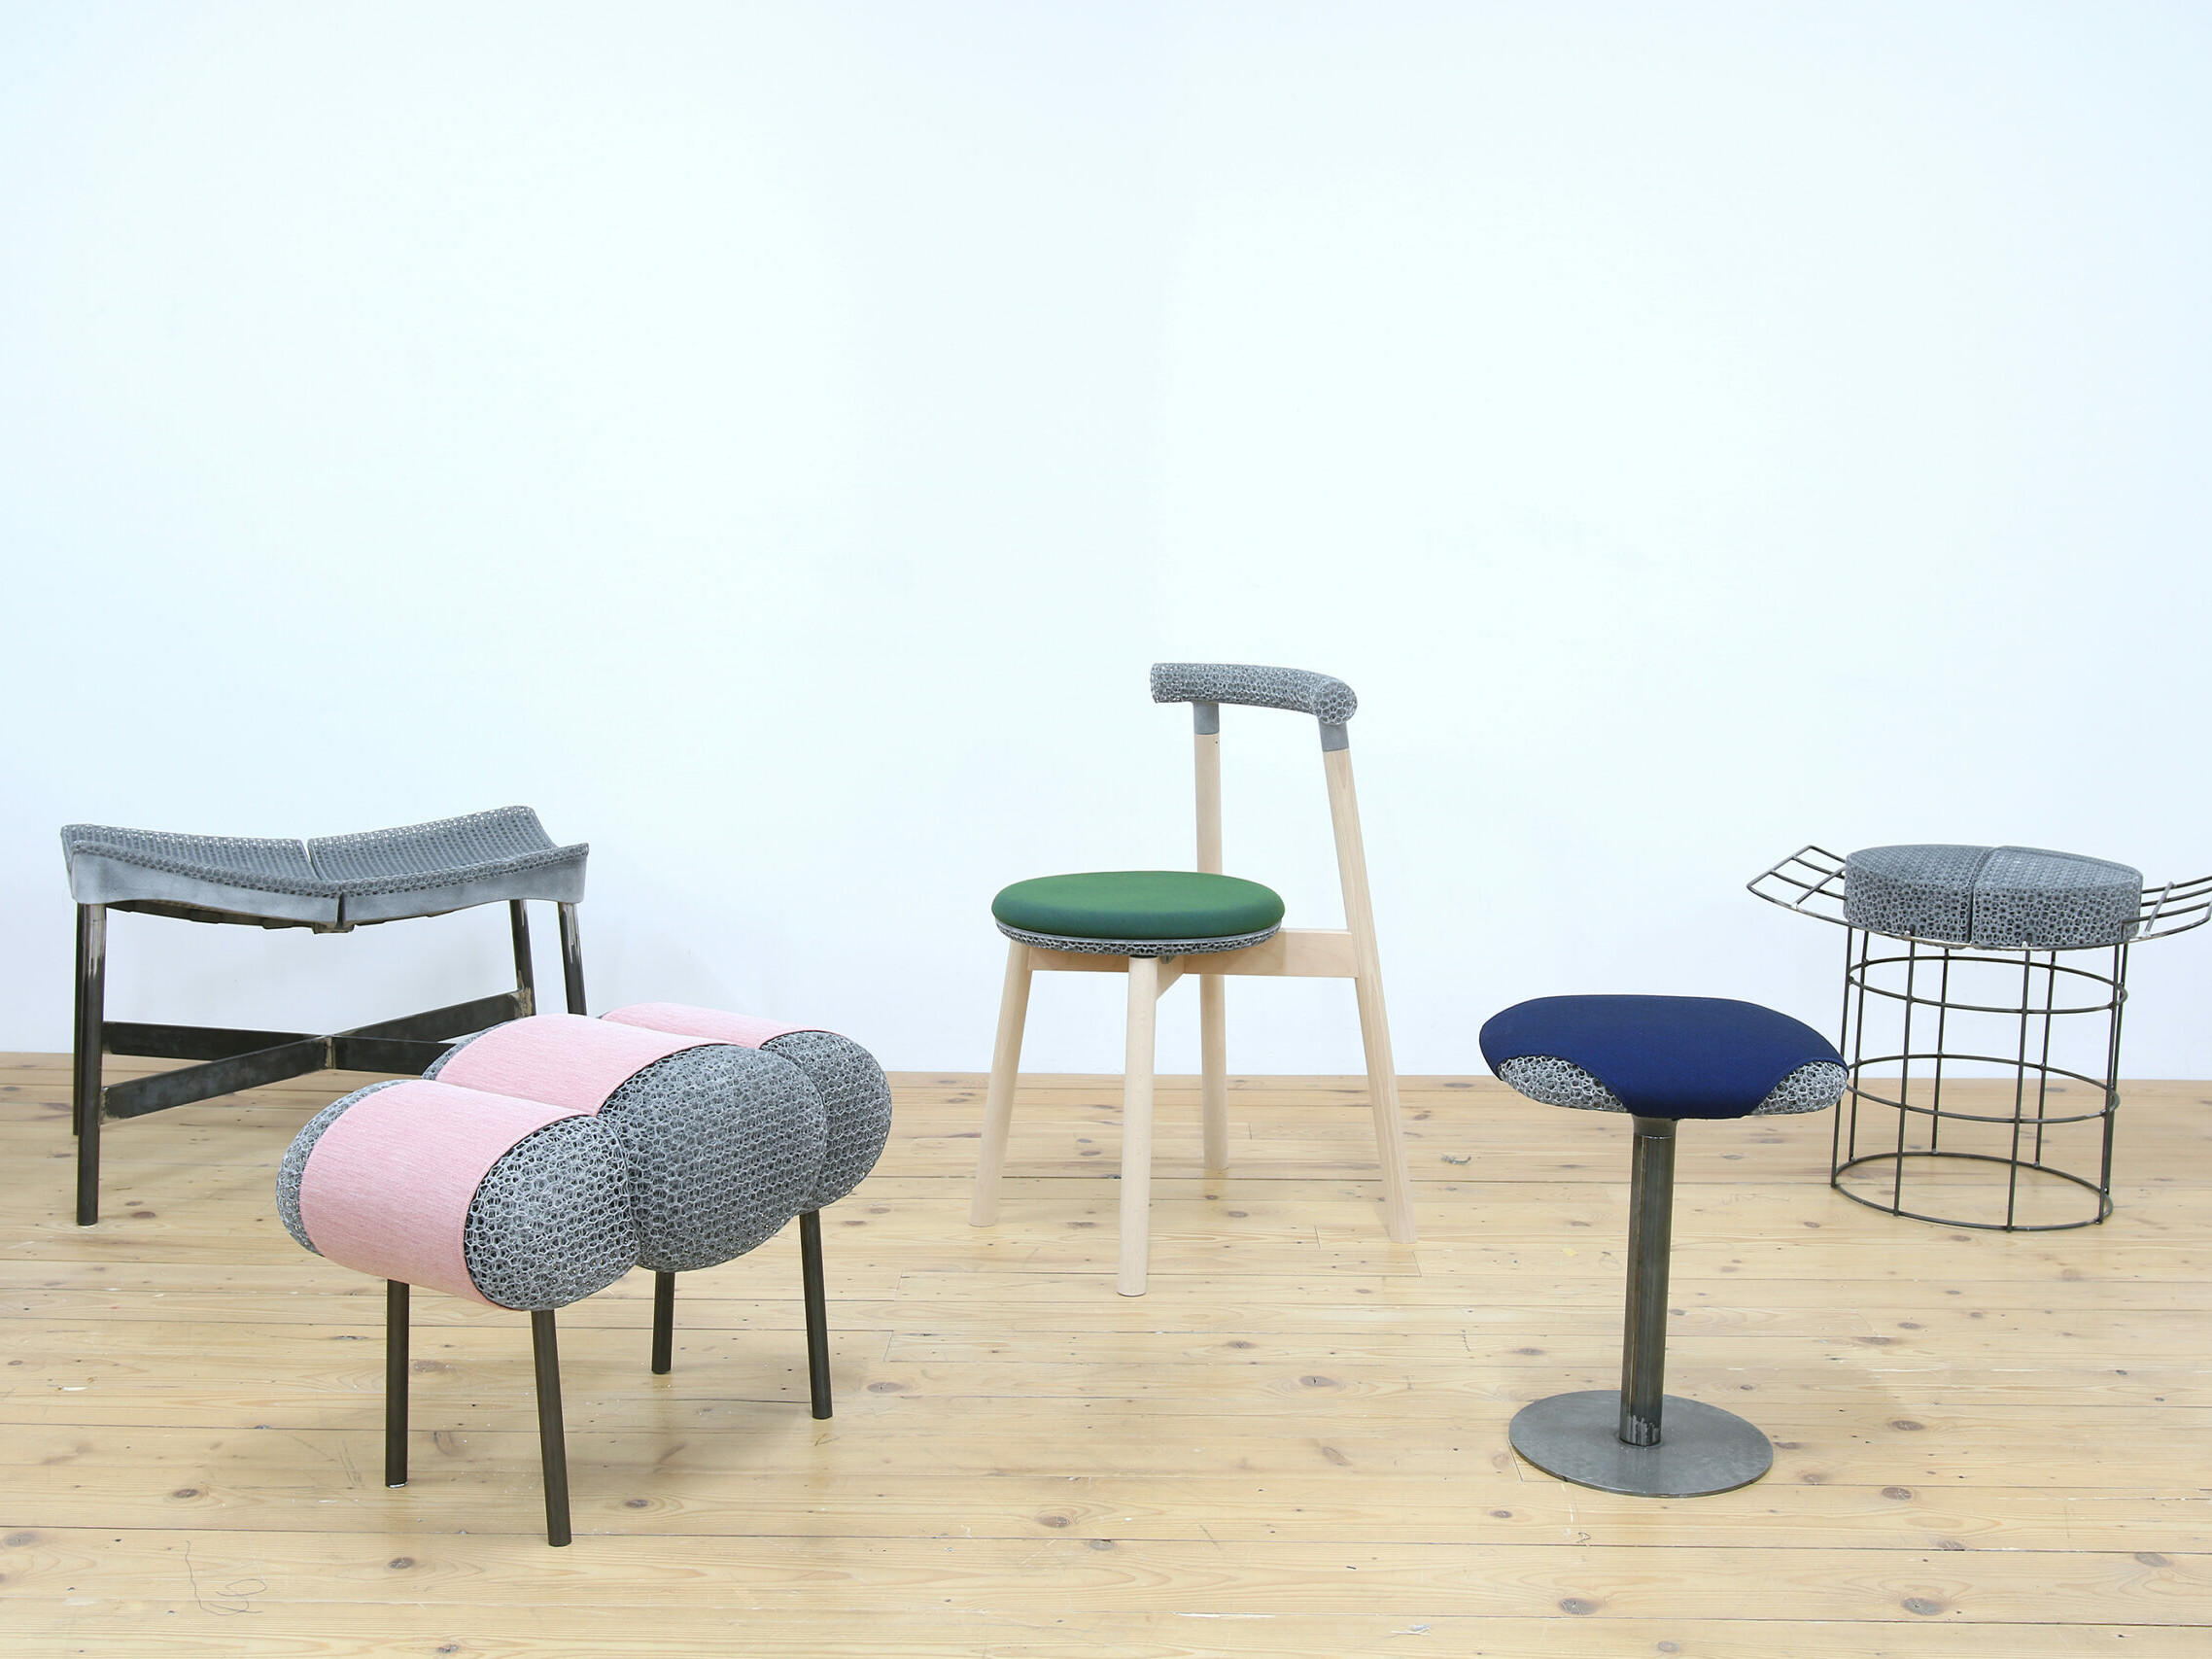 New possibilities of furniture production: Various chairs and stools in front of a white wall on a wooden floor with various substructures and 3D-printed seats and textile covers in blue, pink and green.